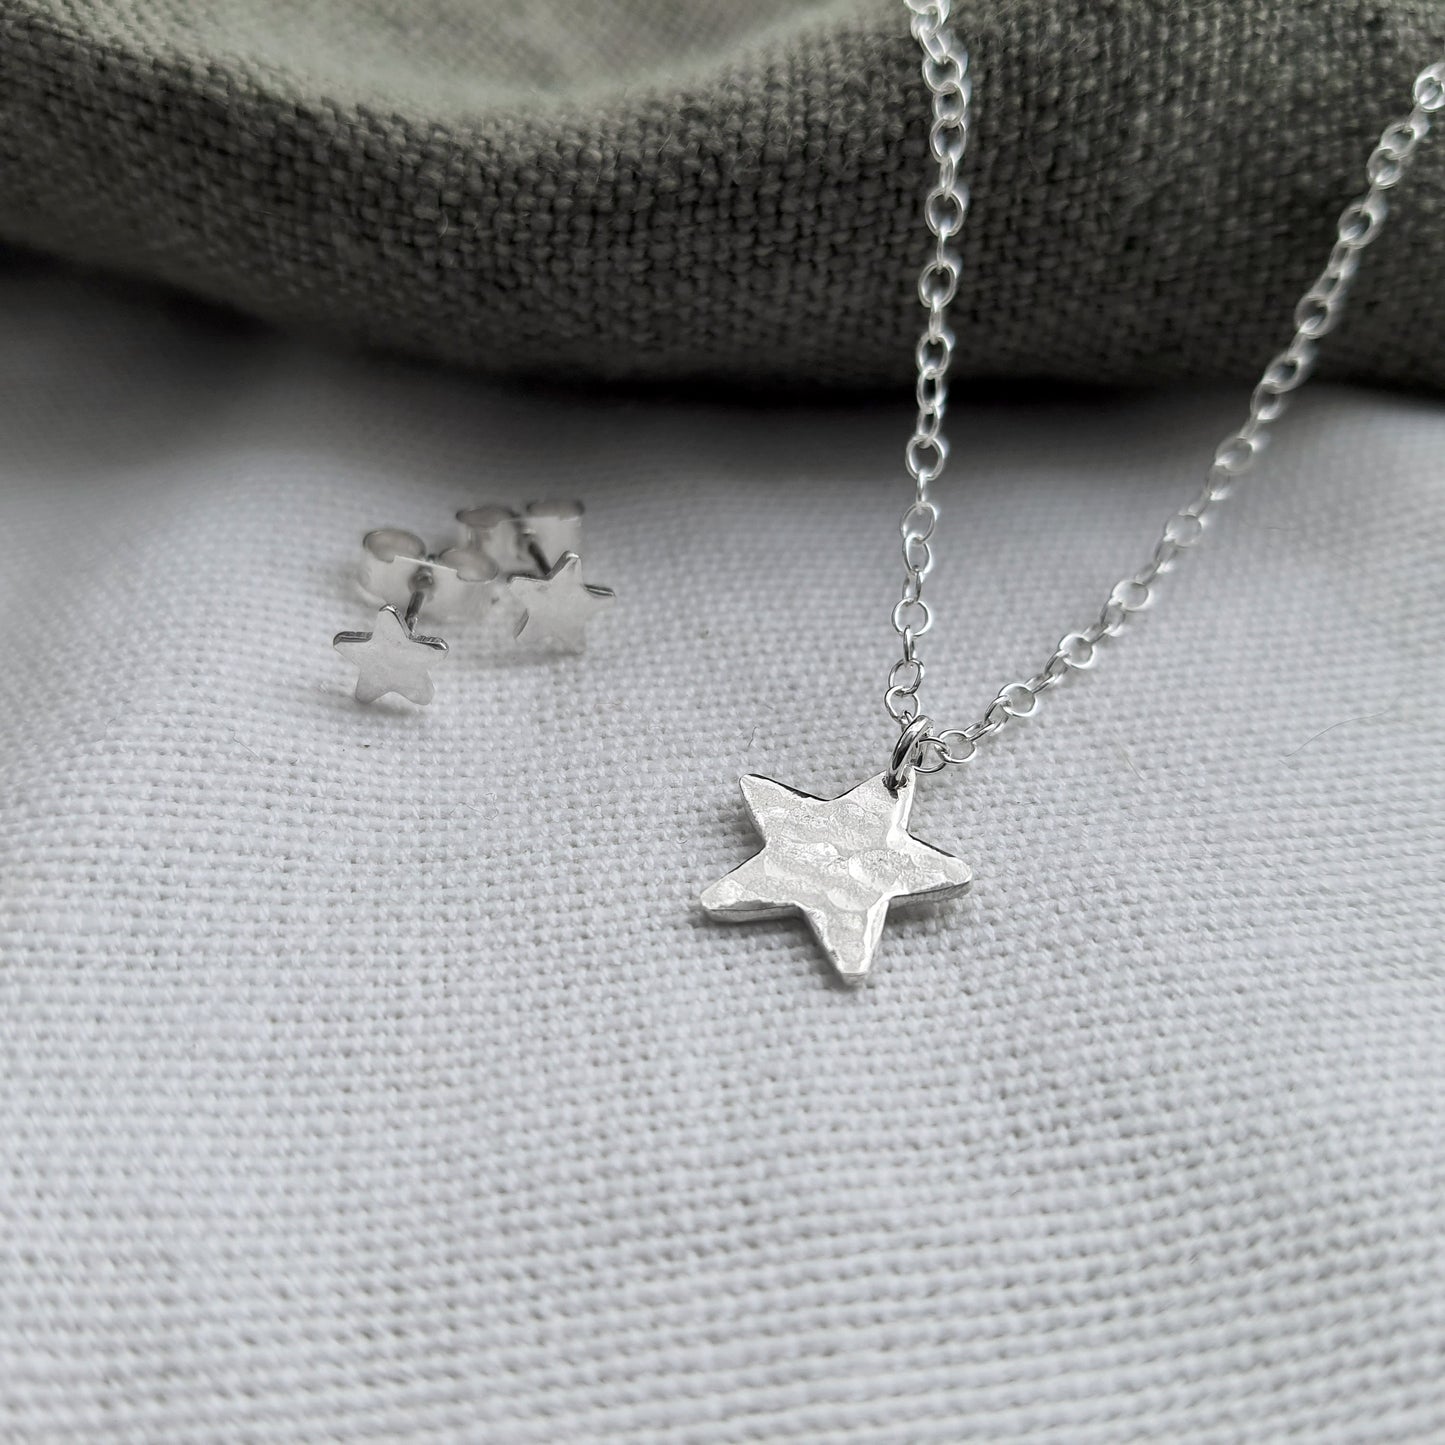 Star Earrings and Necklace